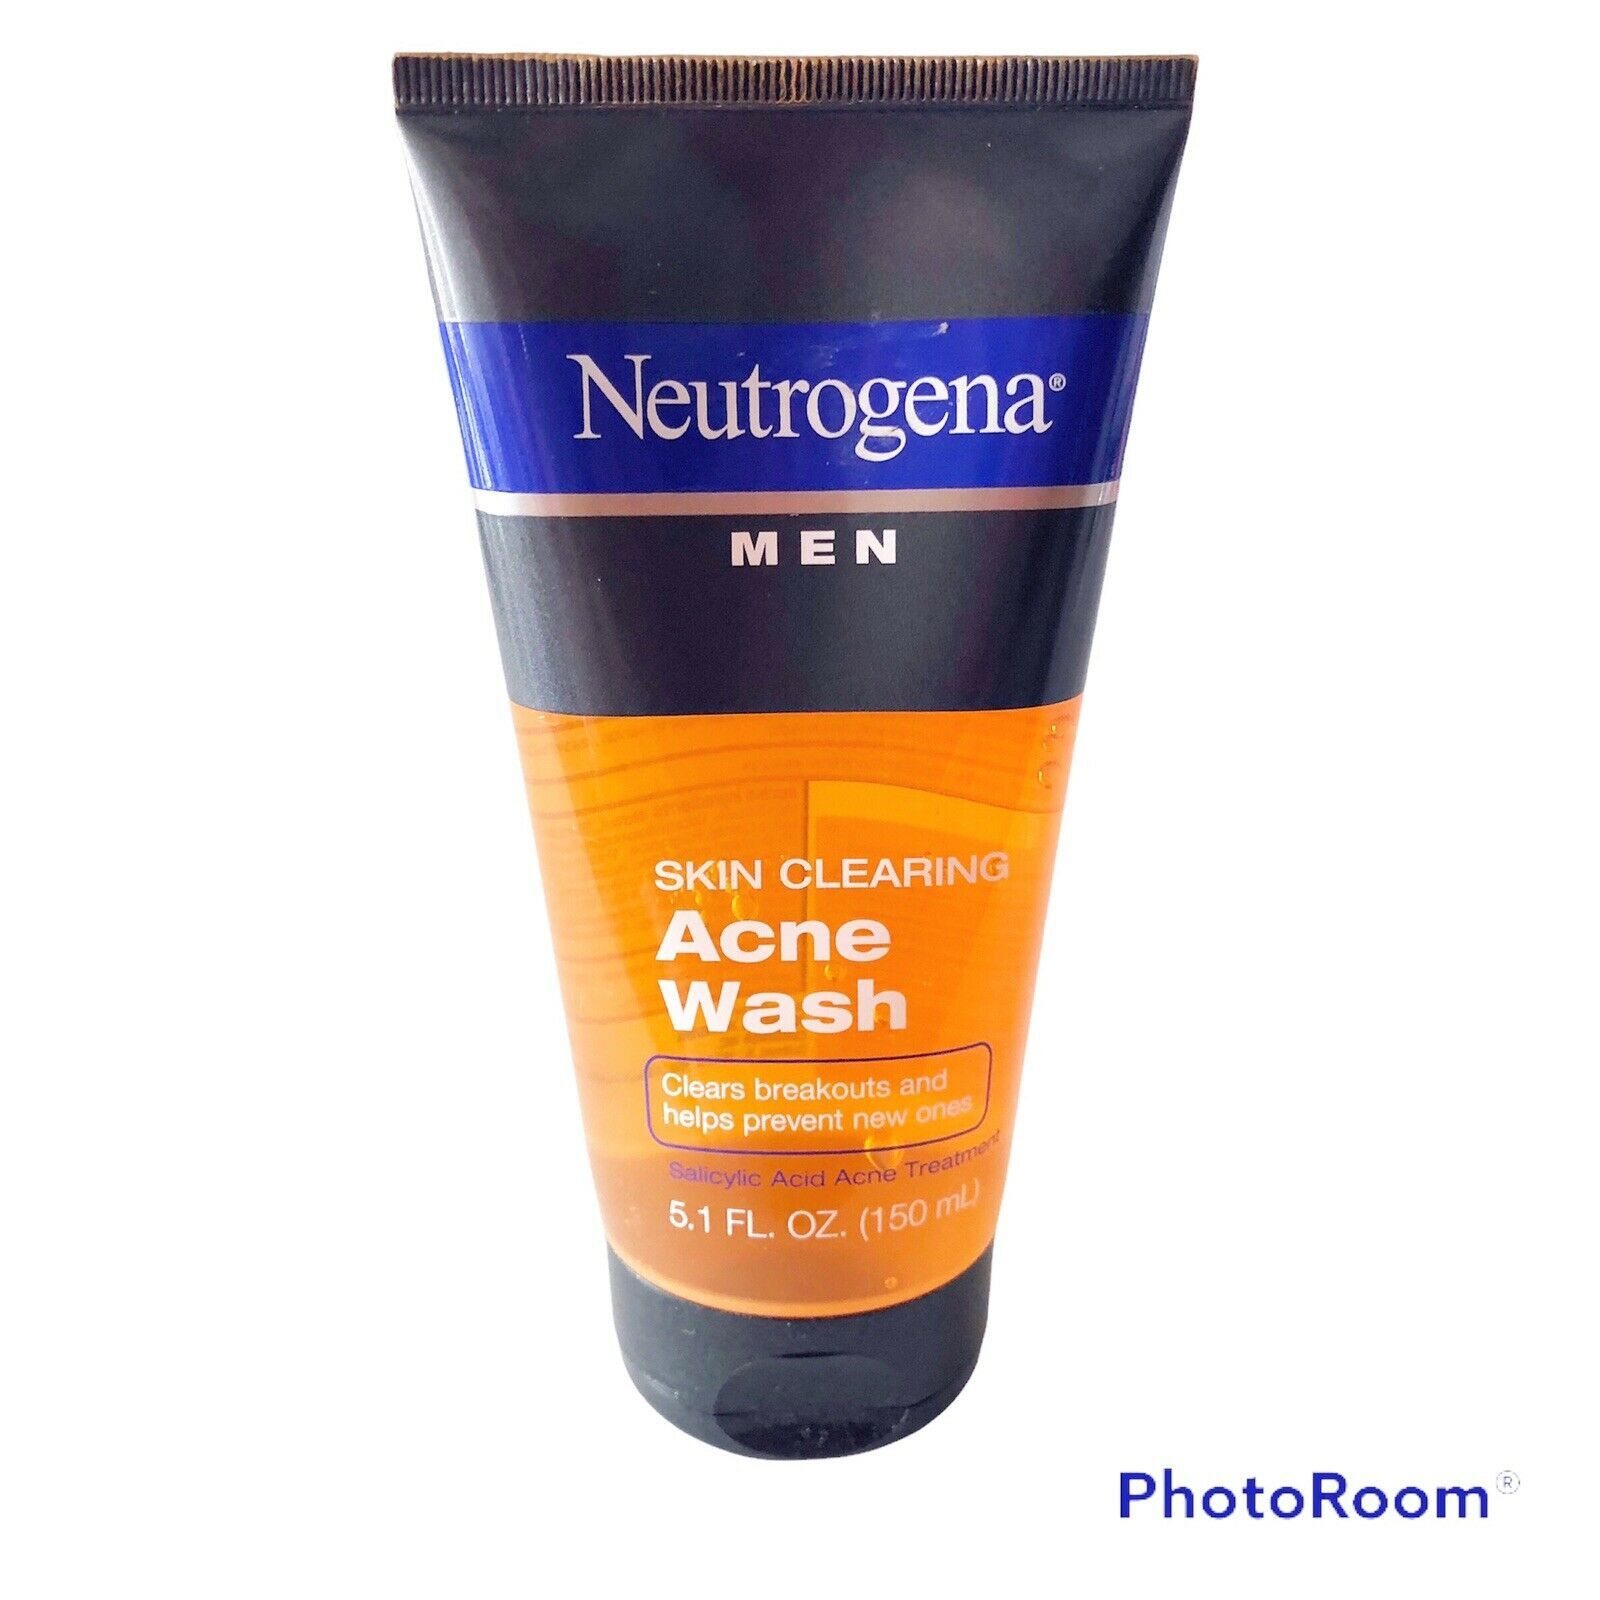 DISCONTINUED Neutrogena Men Skin Clearing Acne Wash 5.1 ounce Cleanser EXP 3/23 - $21.99